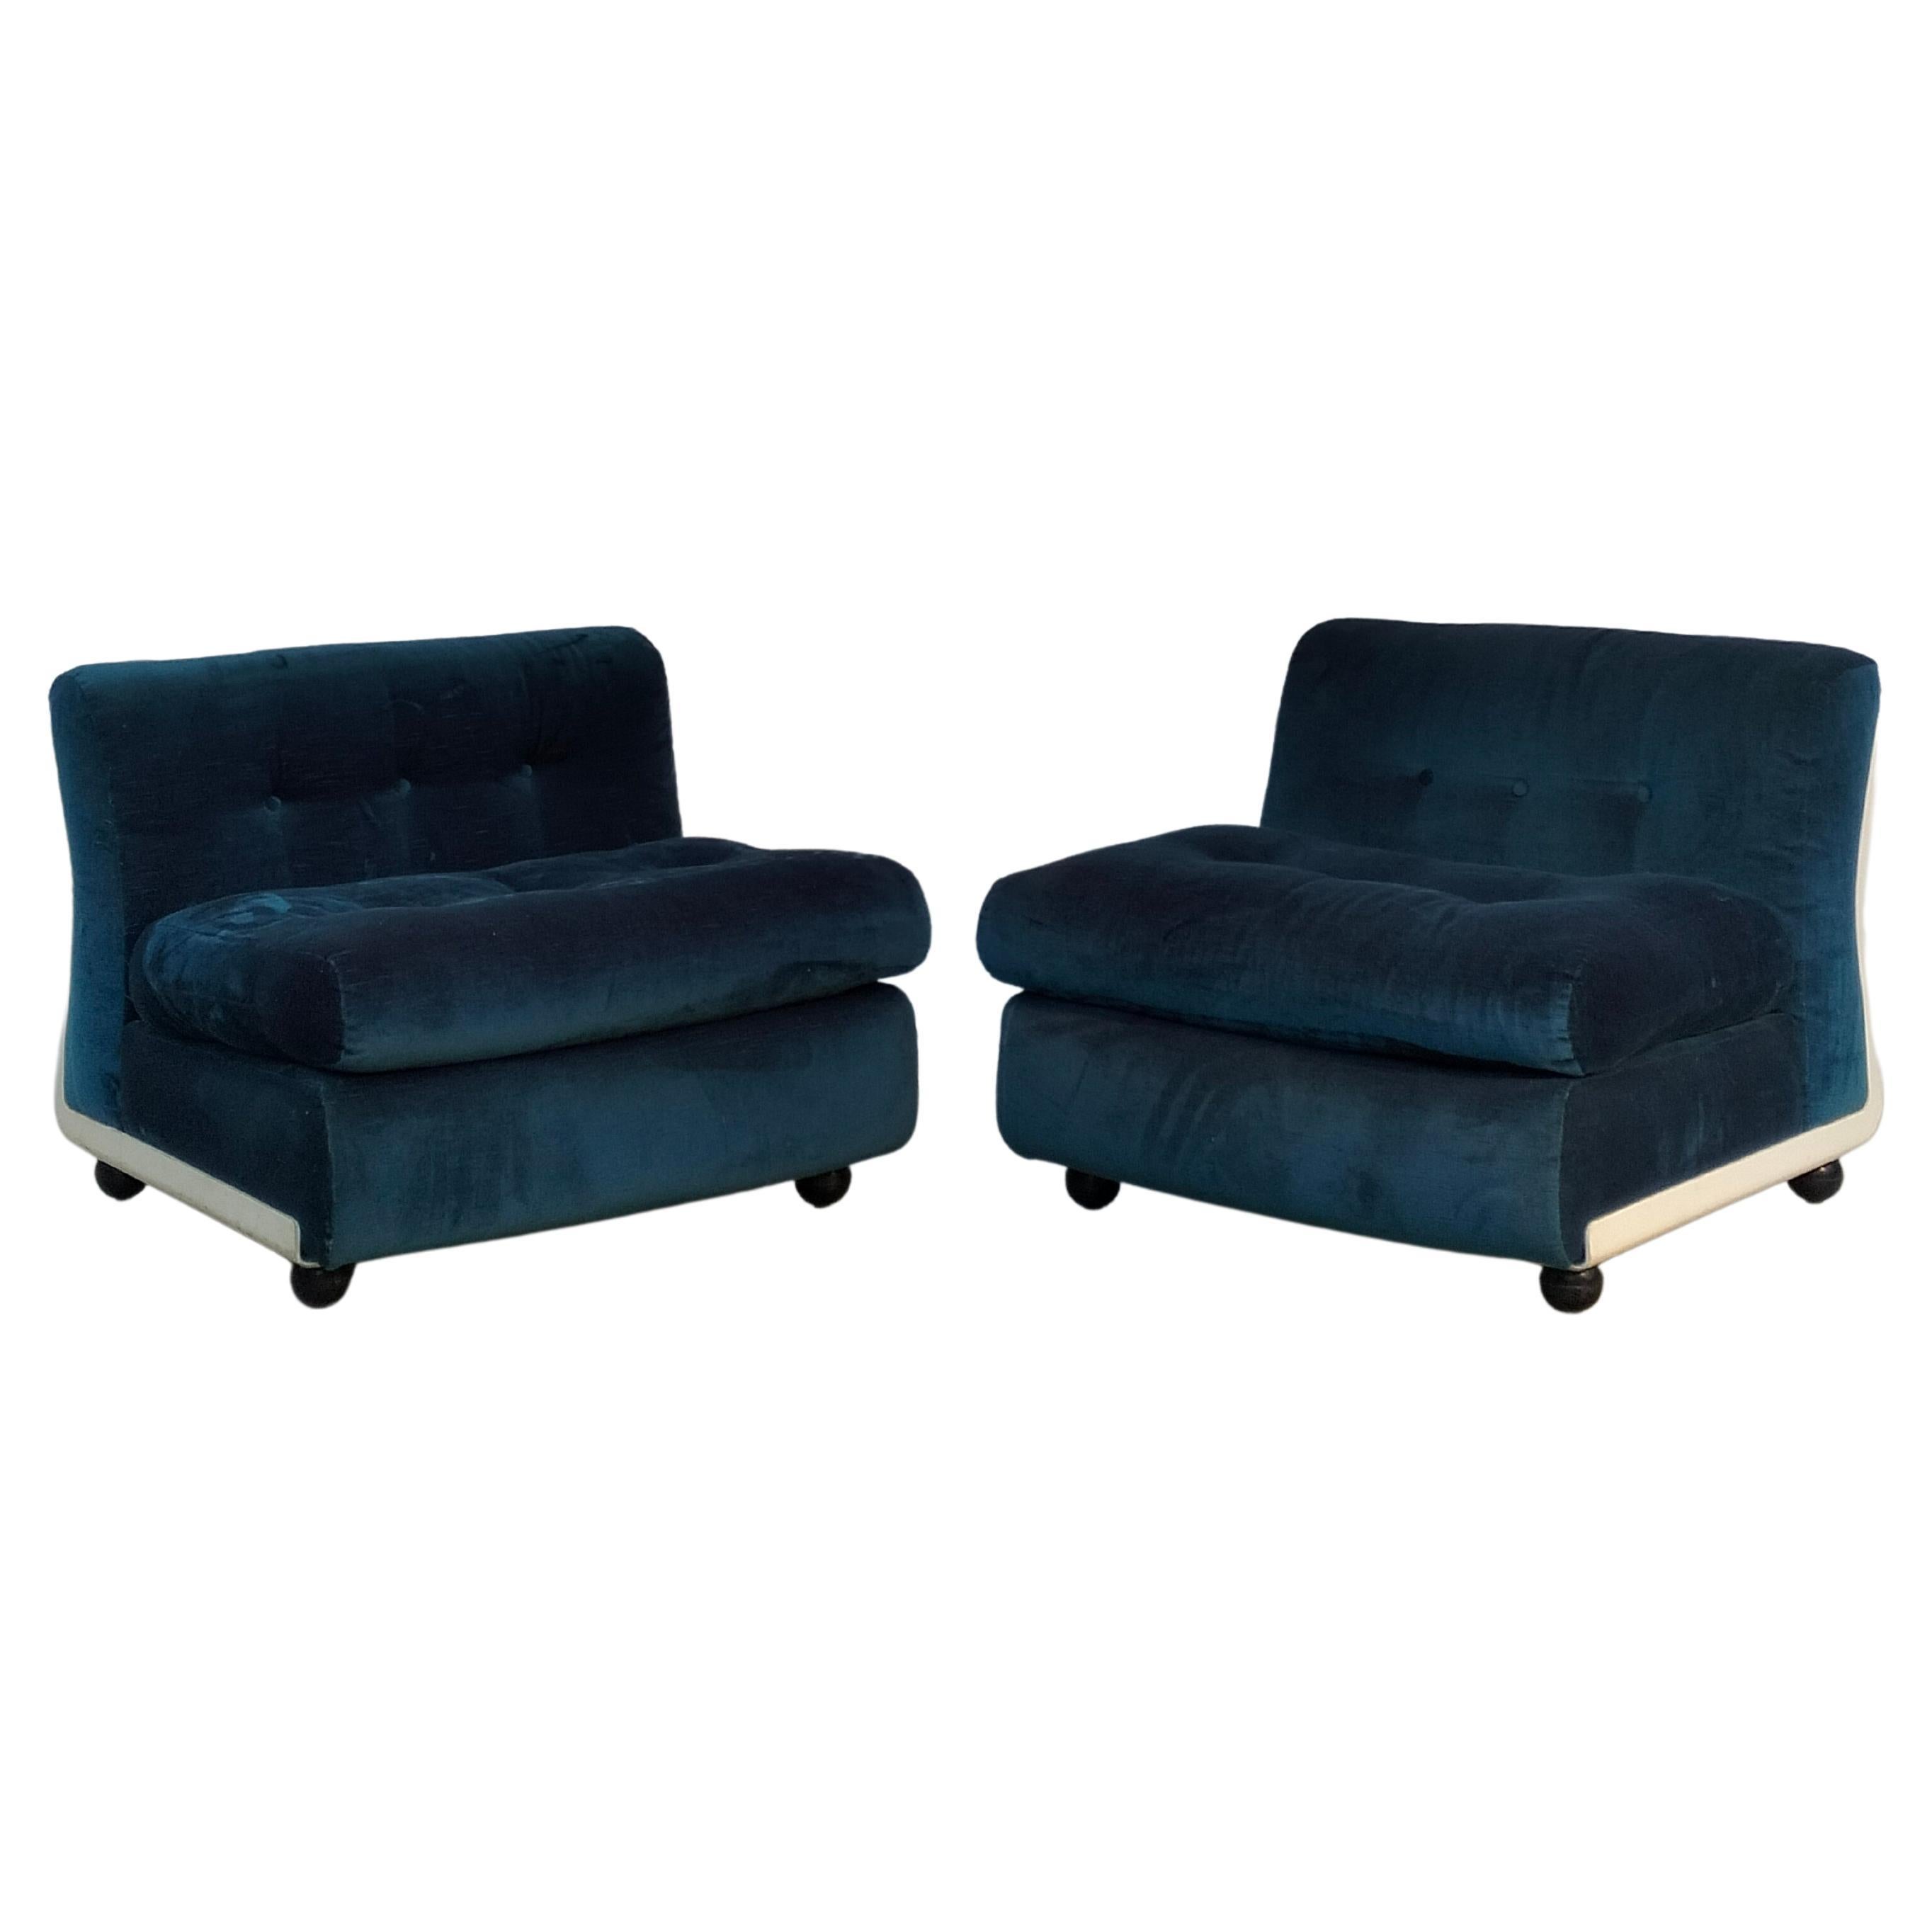 Set of 2 Blue Amanta Lounge Chairs by Mario Bellini for C&B Italia, 1970s